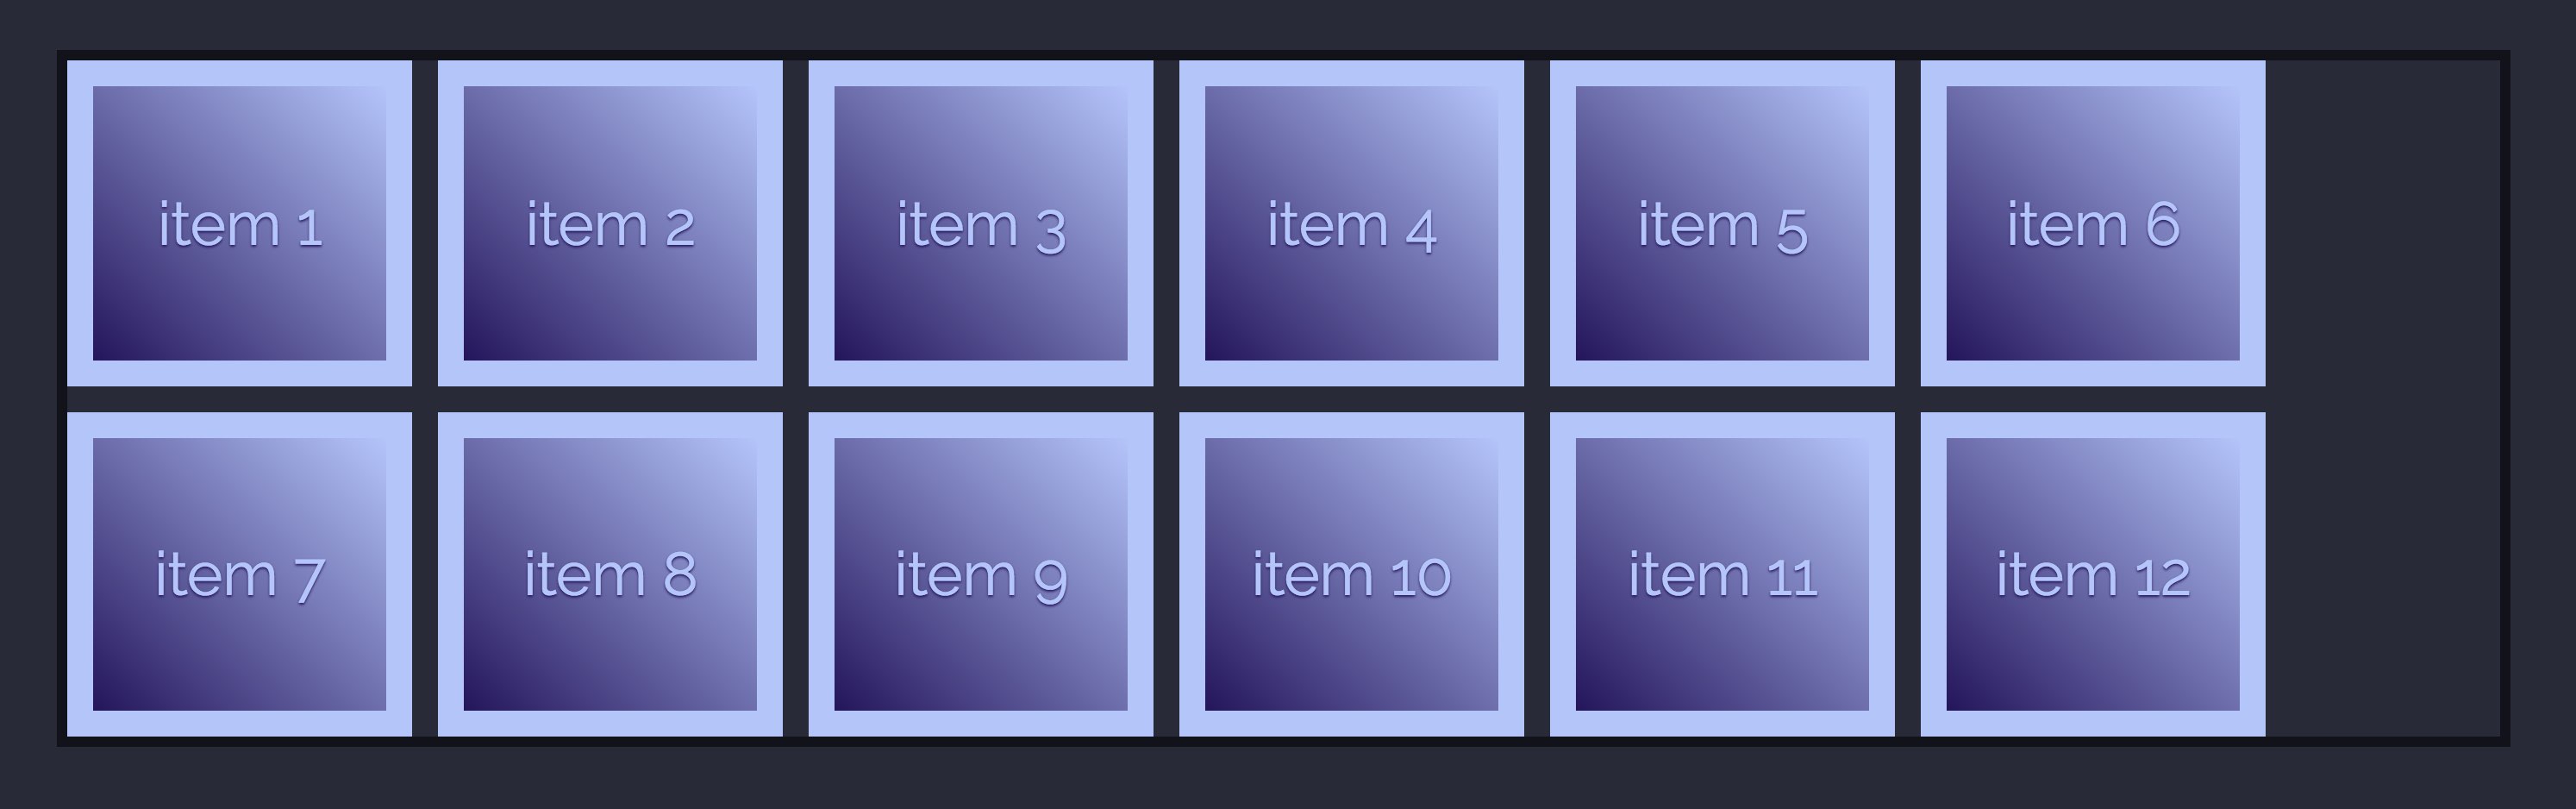 CSS Grid auto-fit repeat